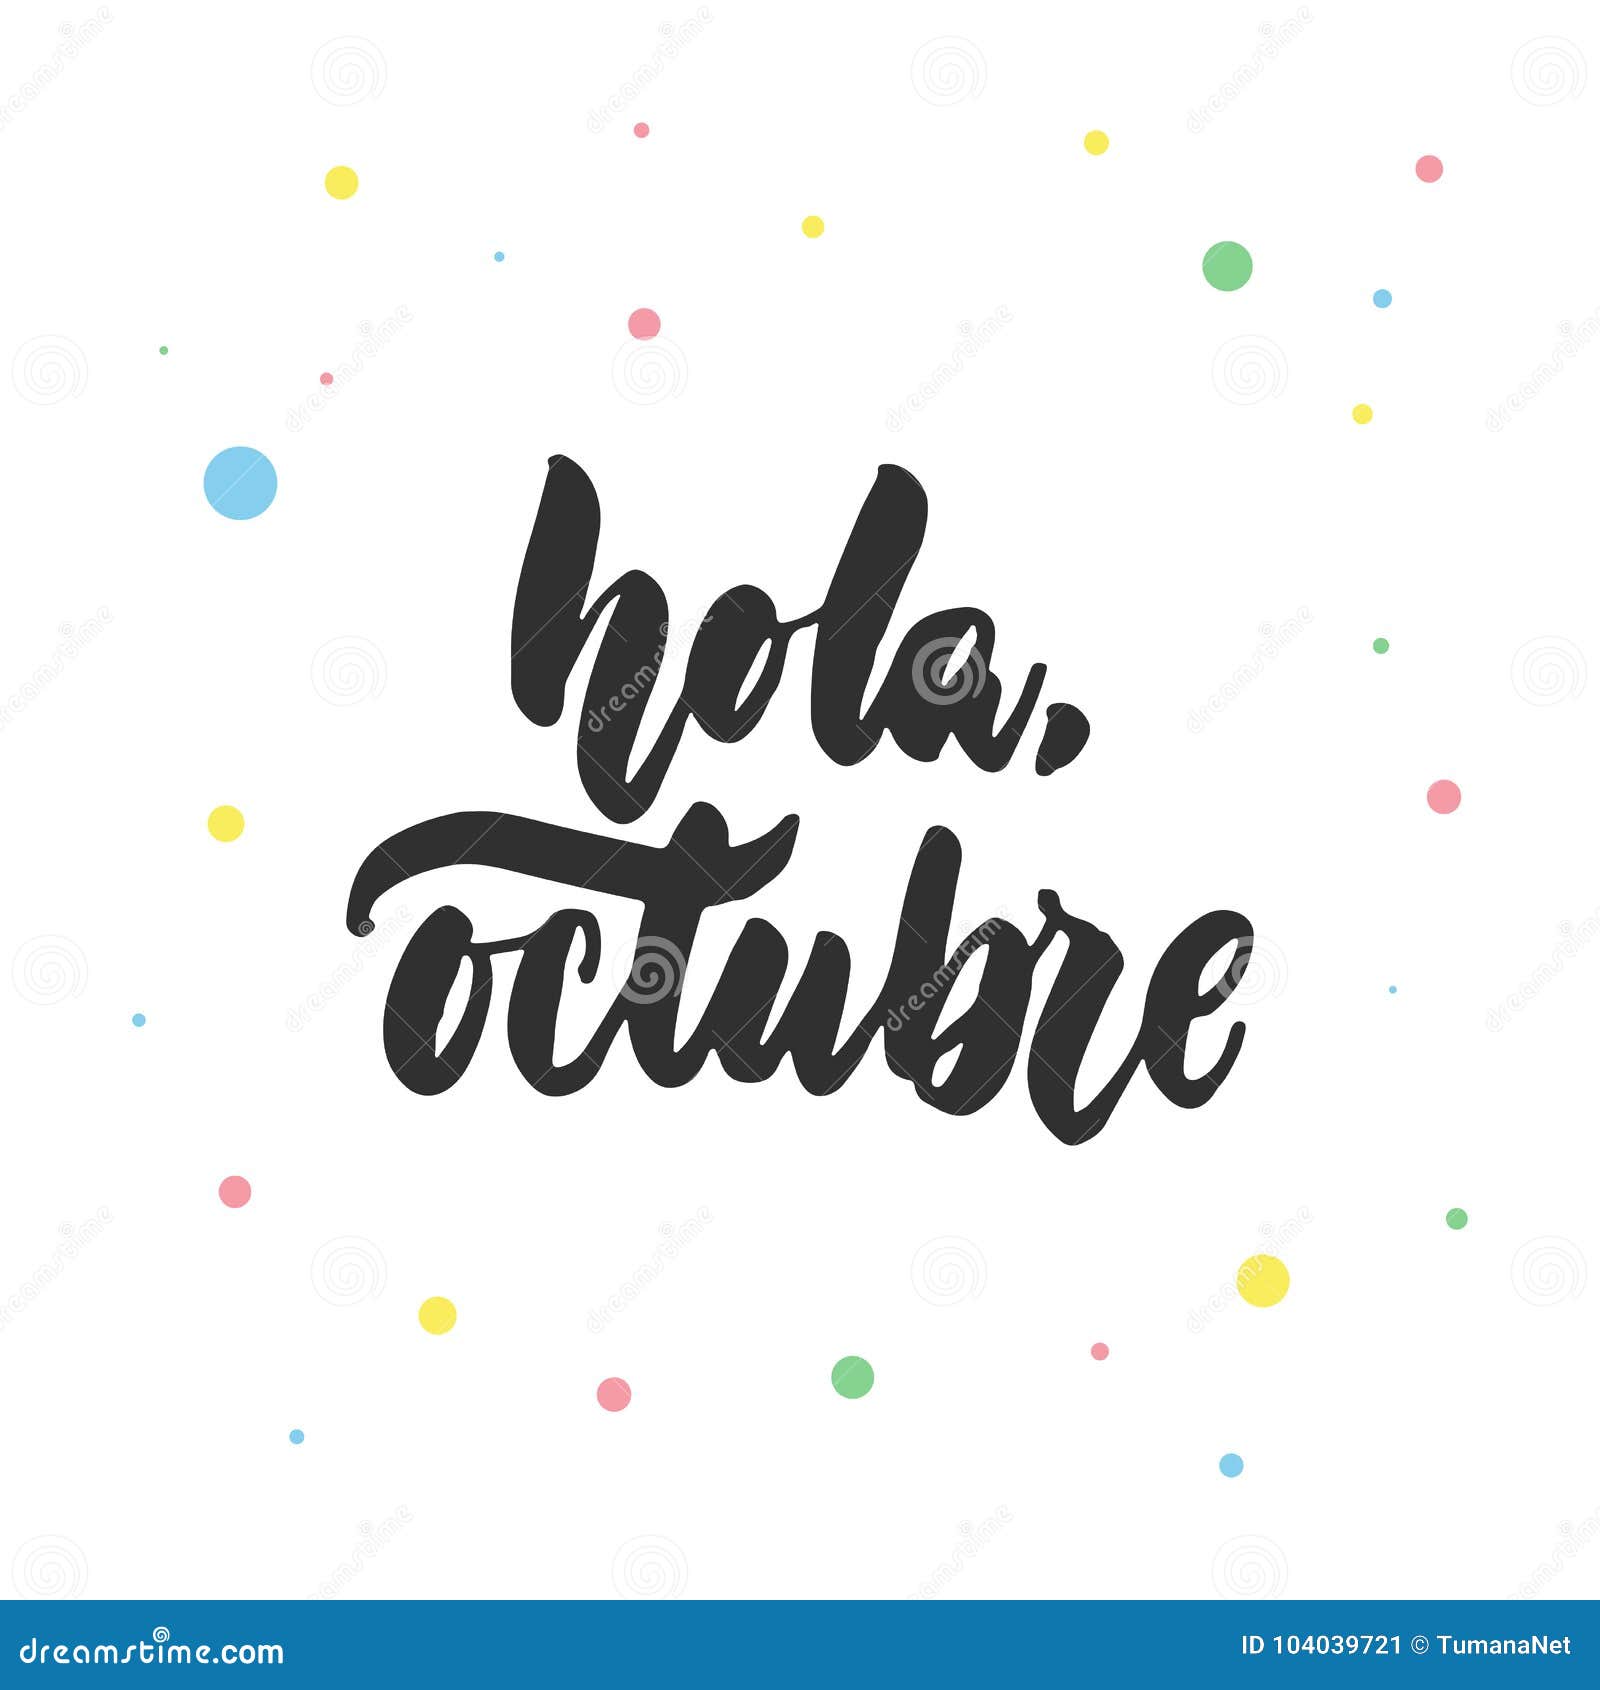 hola, octubre - hello, october in spanish, hand drawn latin lettering quote